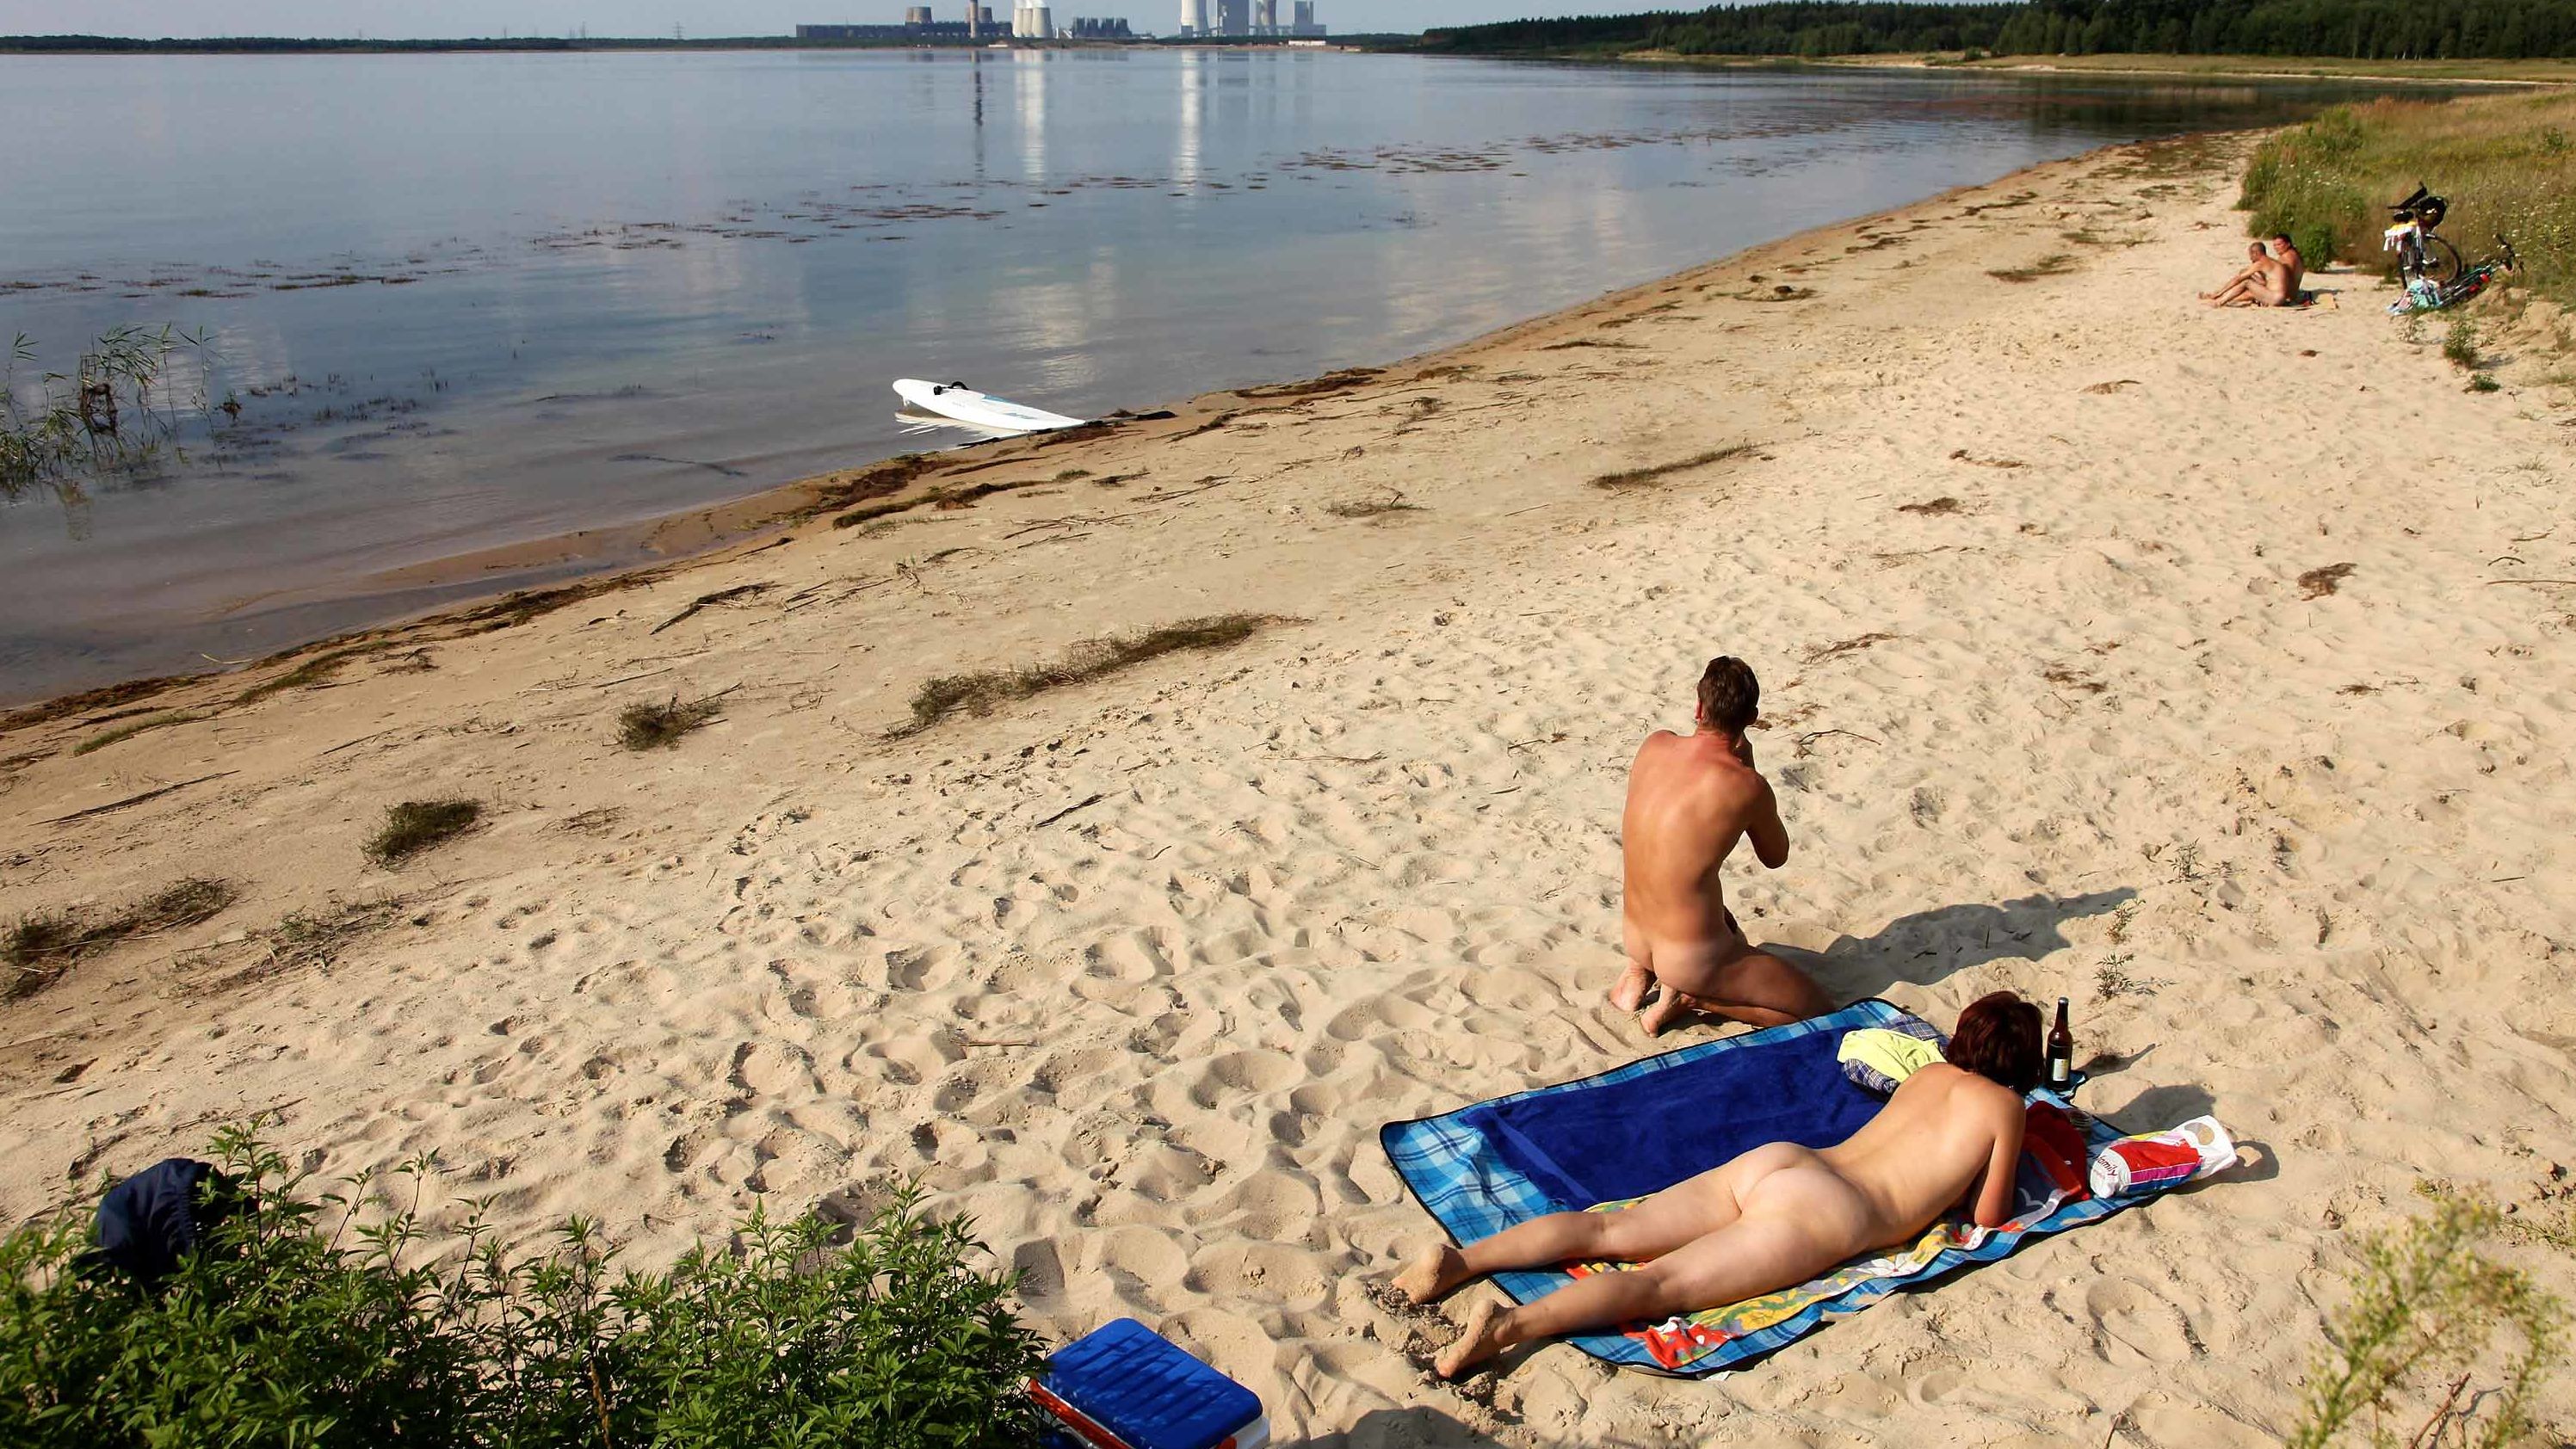 Top Nudist Mom - Nudity in Germany: The naked truth is revealed | CNN